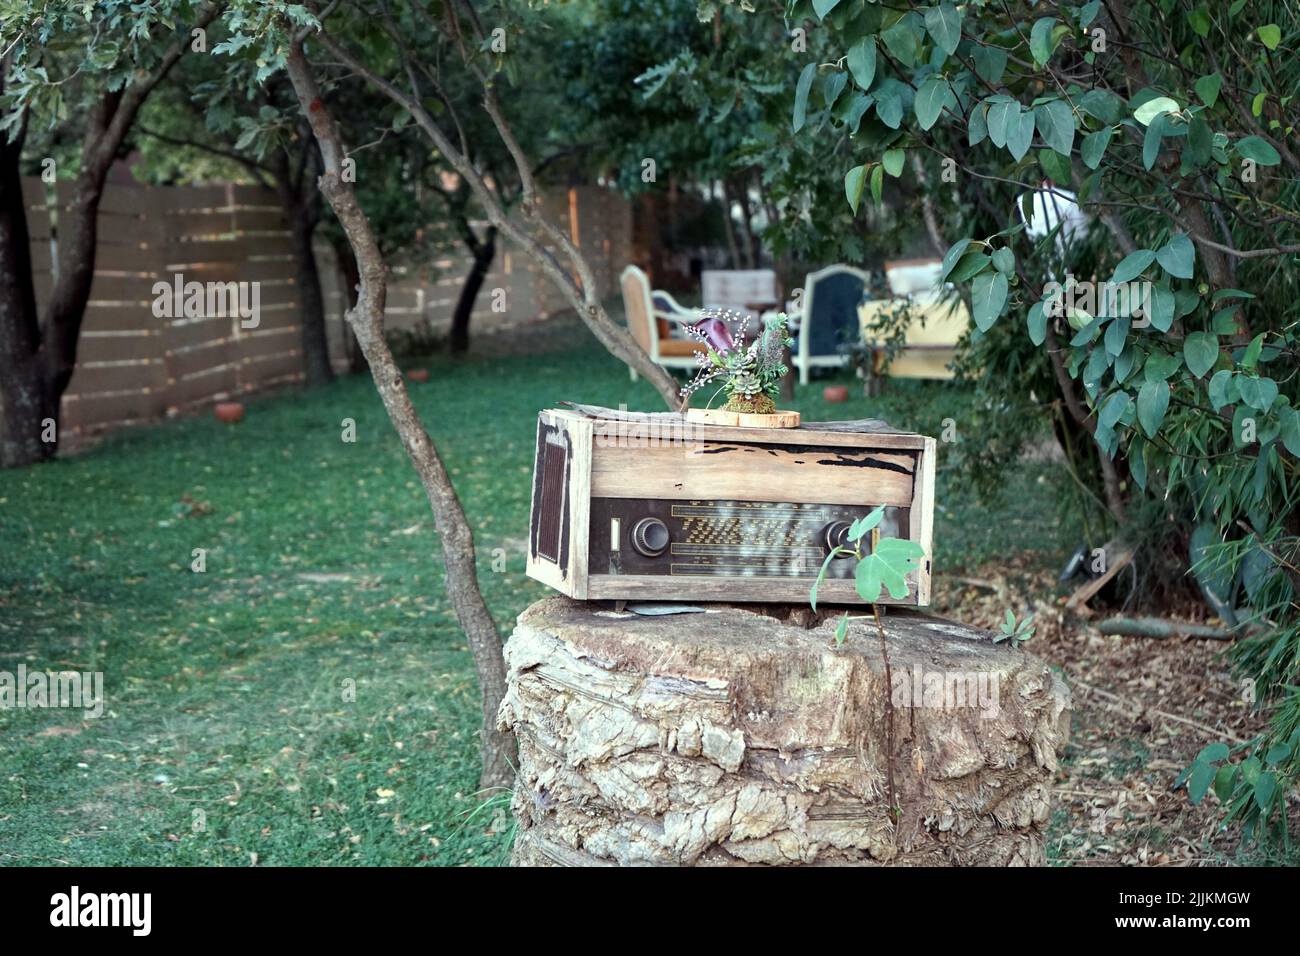 An old weathered radio broadcaster on a tree stump in a garden with green grass and trees Stock Photo